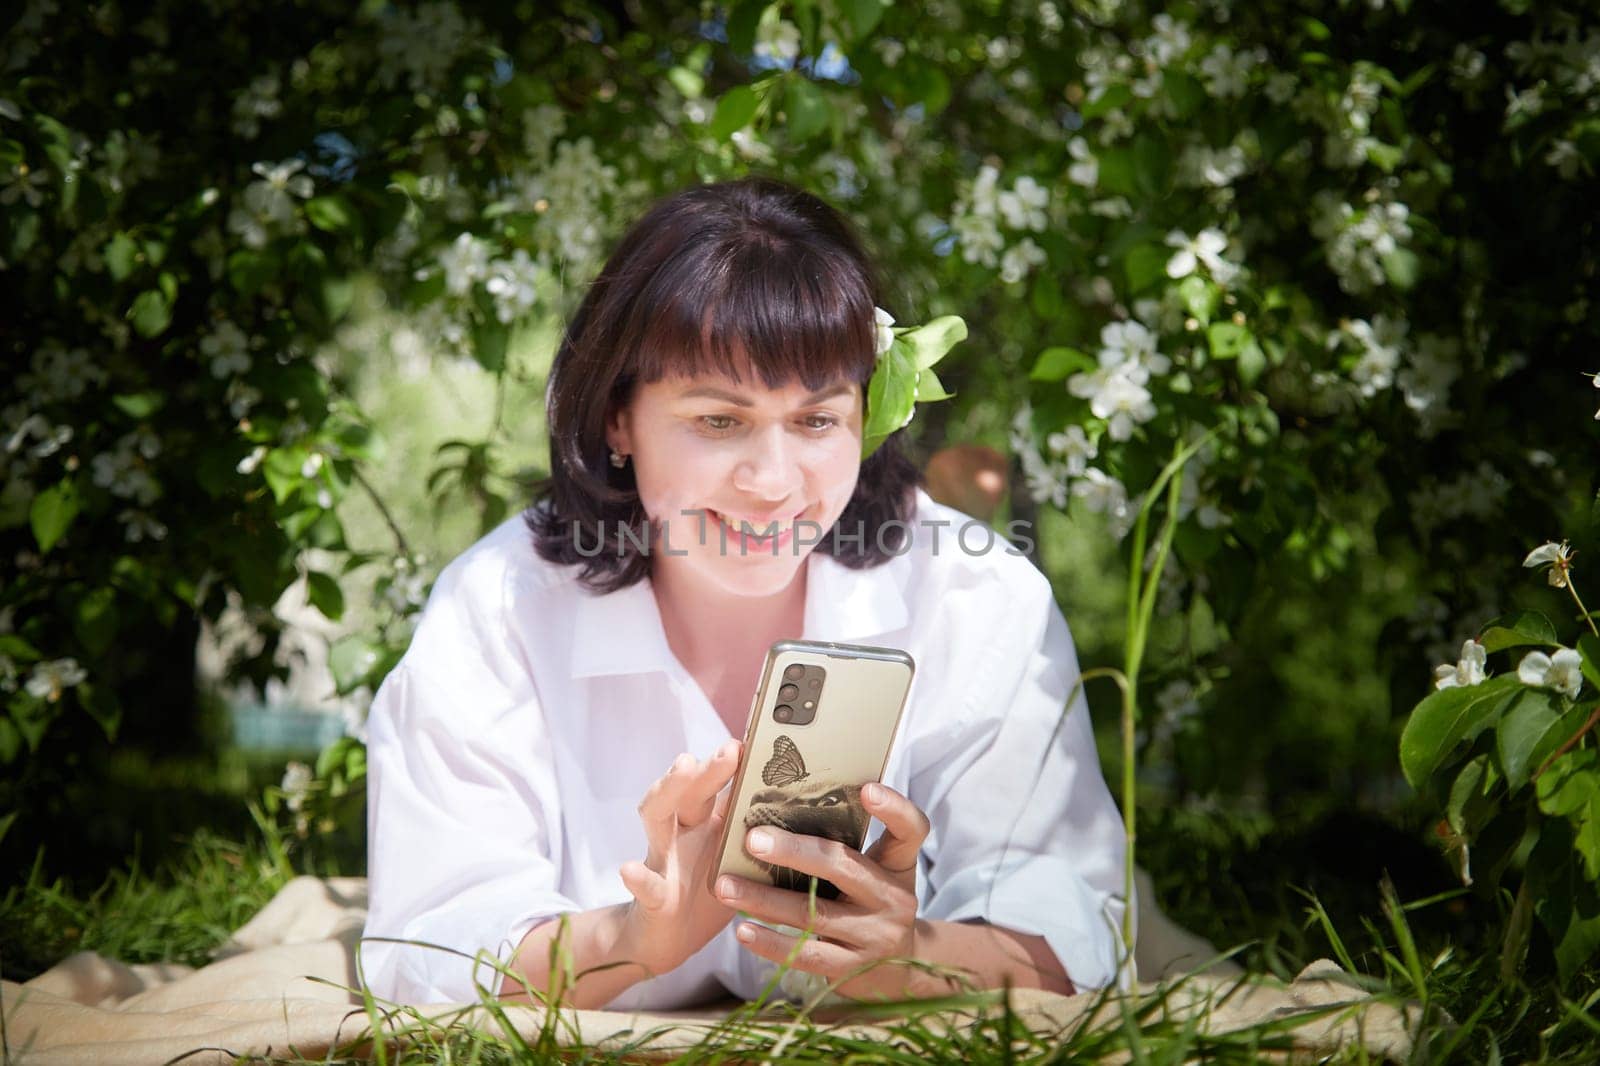 Brunette girl Using Smartphone in Blossoming Orchard in Springtime. Middle aged Woman enjoying phone among spring blossoms of apple or sakura trees